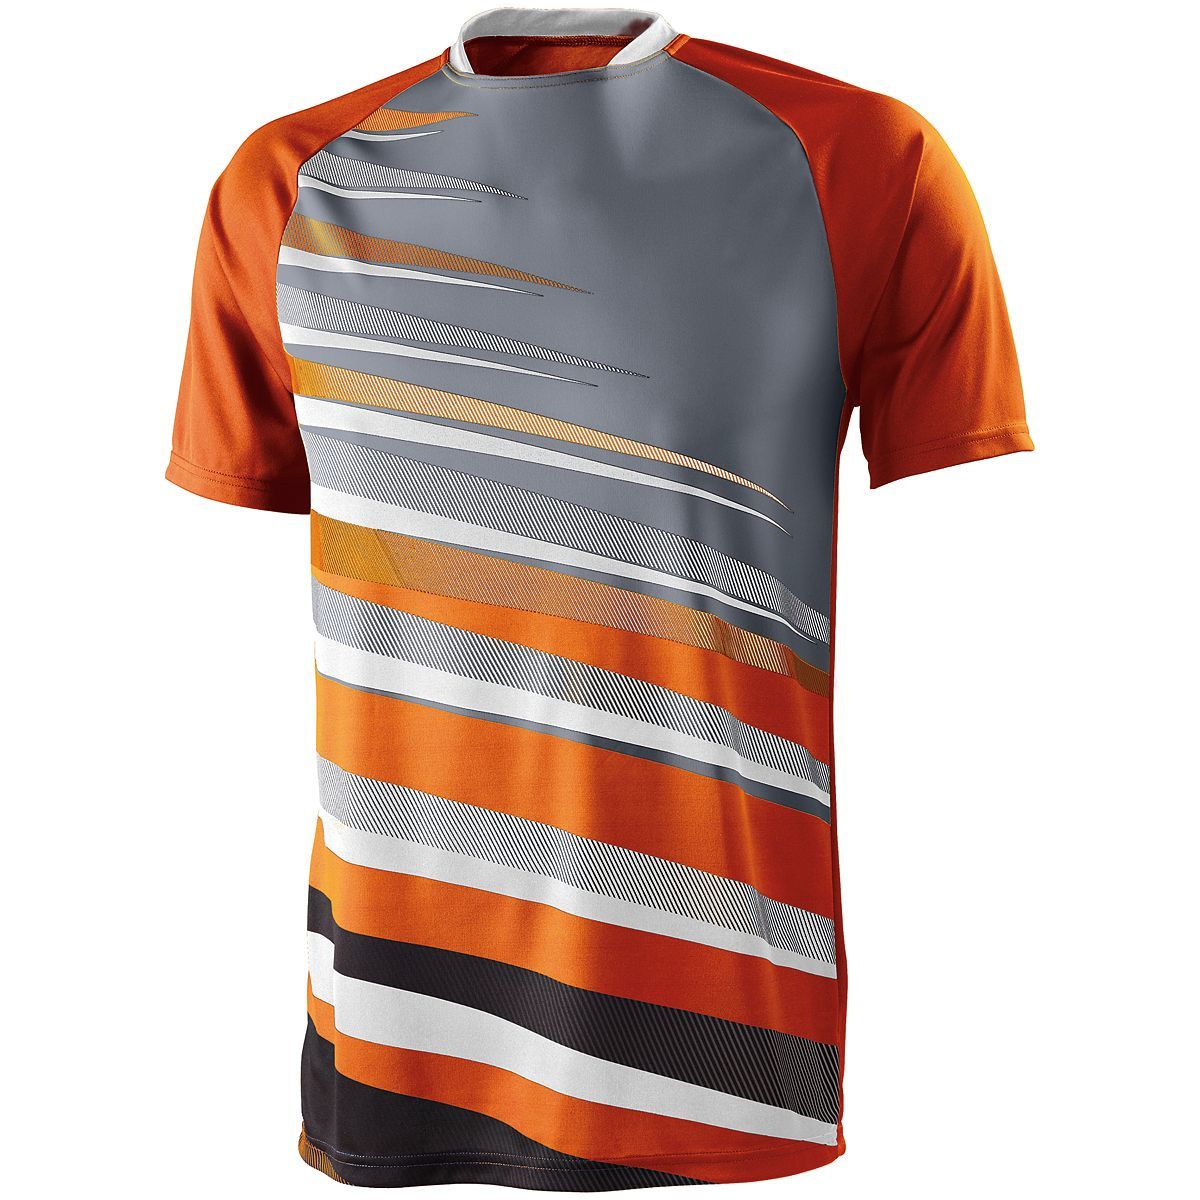 High 5 Youth Galactic Jersey in Power Orange/White/Graphite  -Part of the Youth, Youth-Jersey, High5-Products, Soccer, Shirts, All-Sports-1 product lines at KanaleyCreations.com